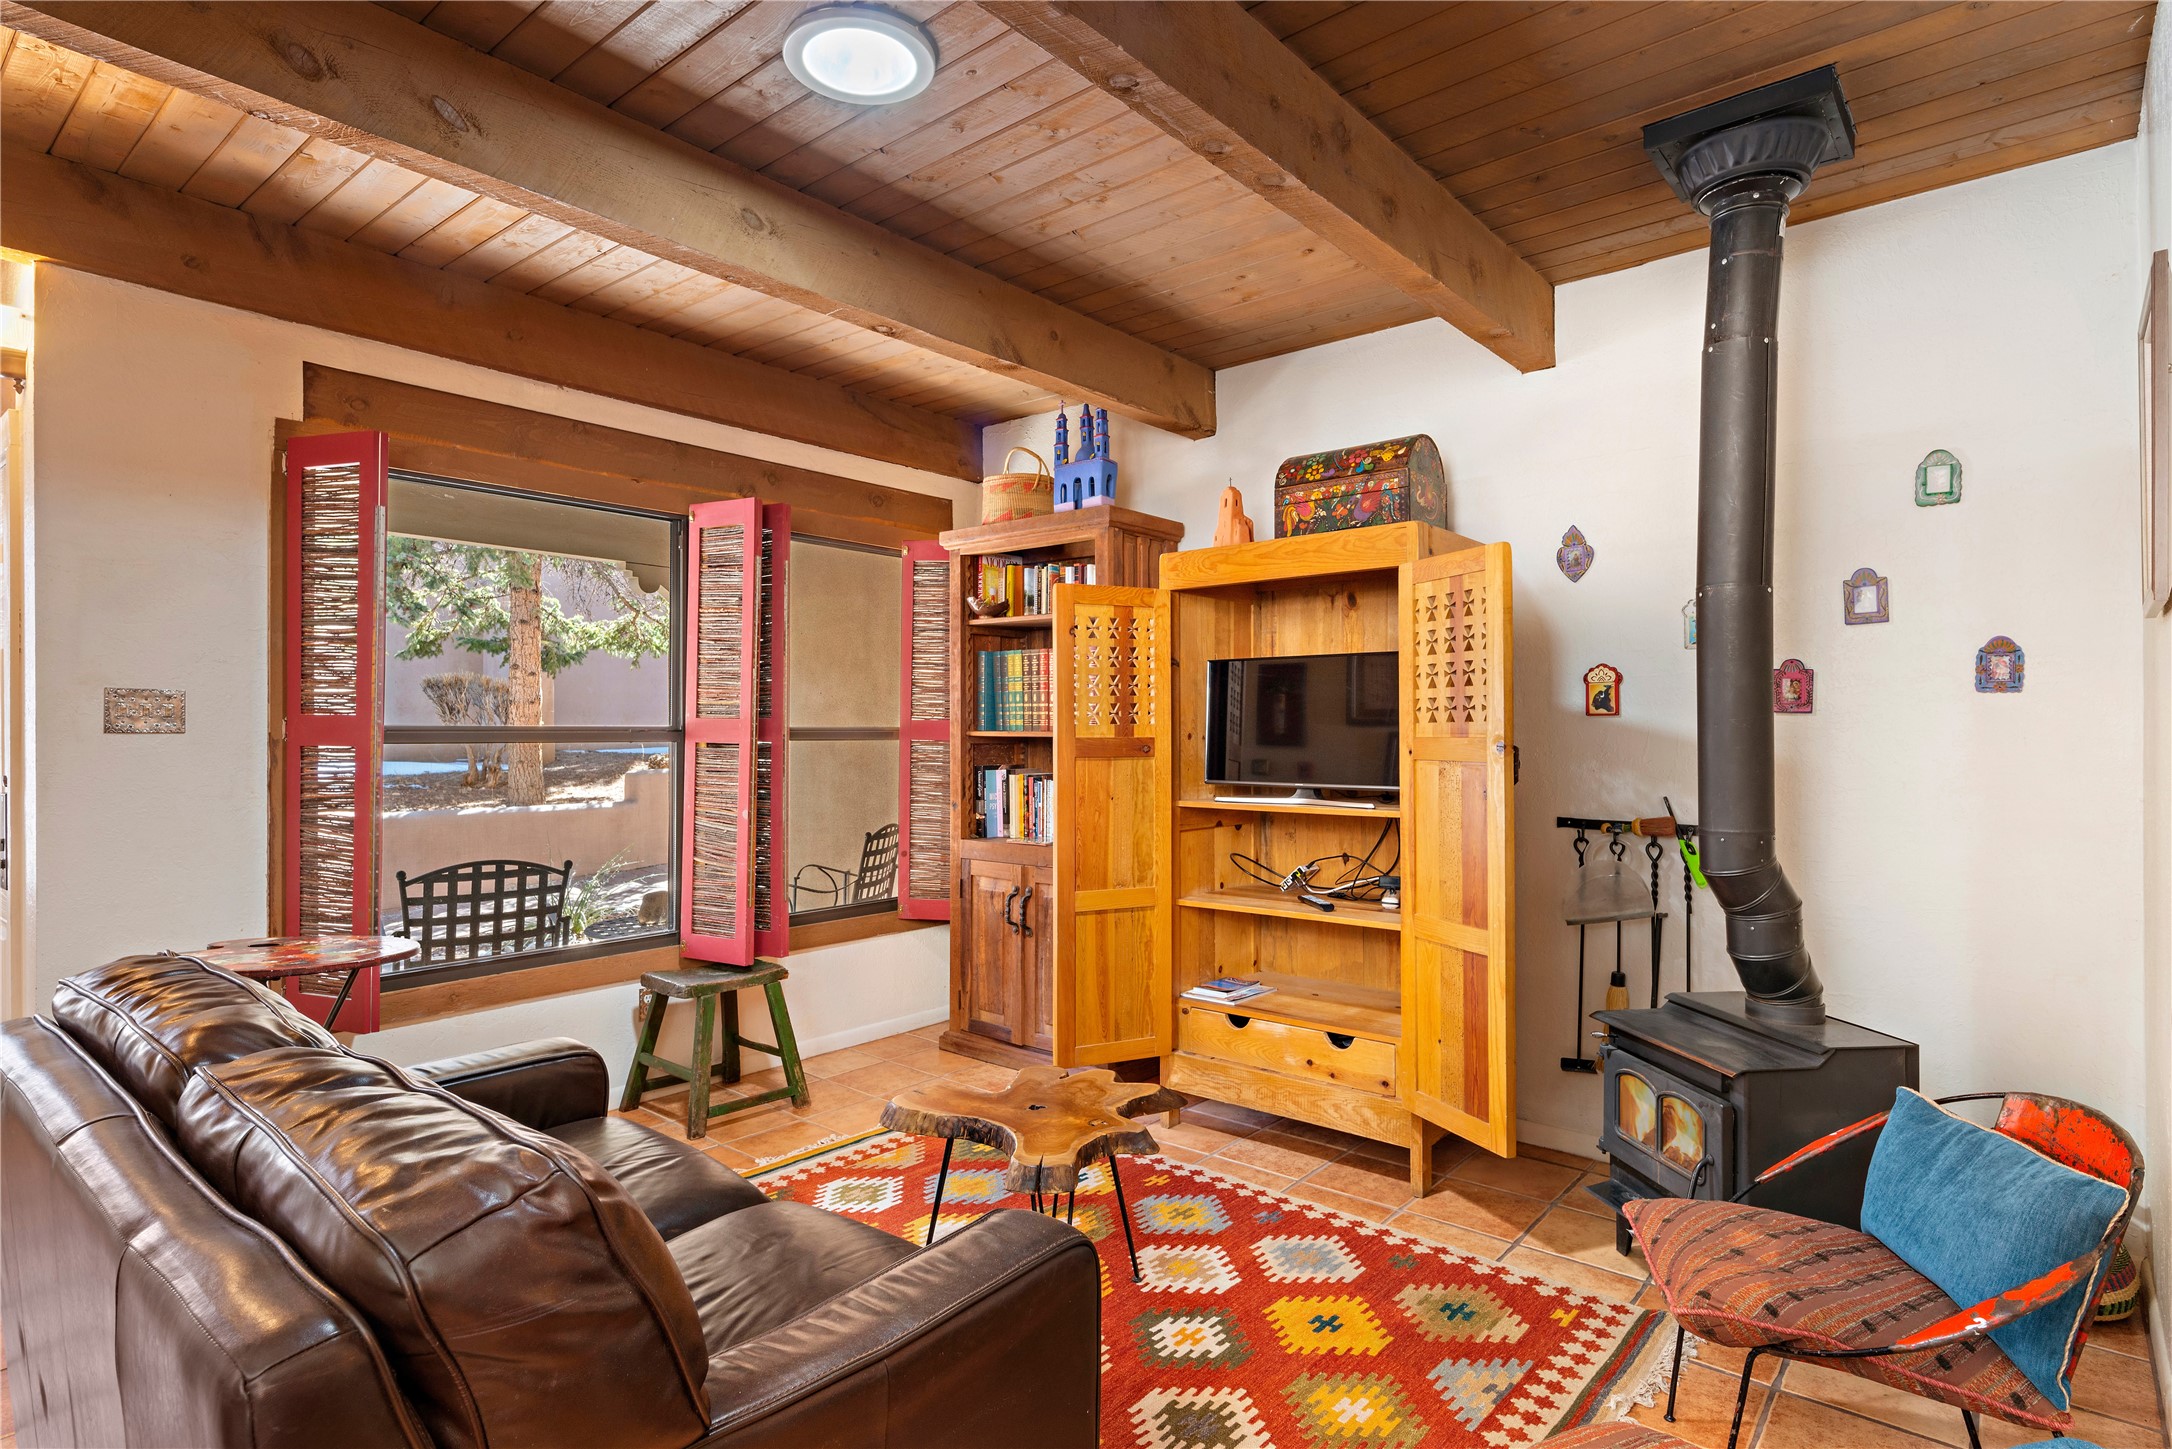 320 Artist Rd #76, Santa Fe, New Mexico 87501, 1 Bedroom Bedrooms, ,1 BathroomBathrooms,Residential,For Sale,320 Artist Rd #76,202232162